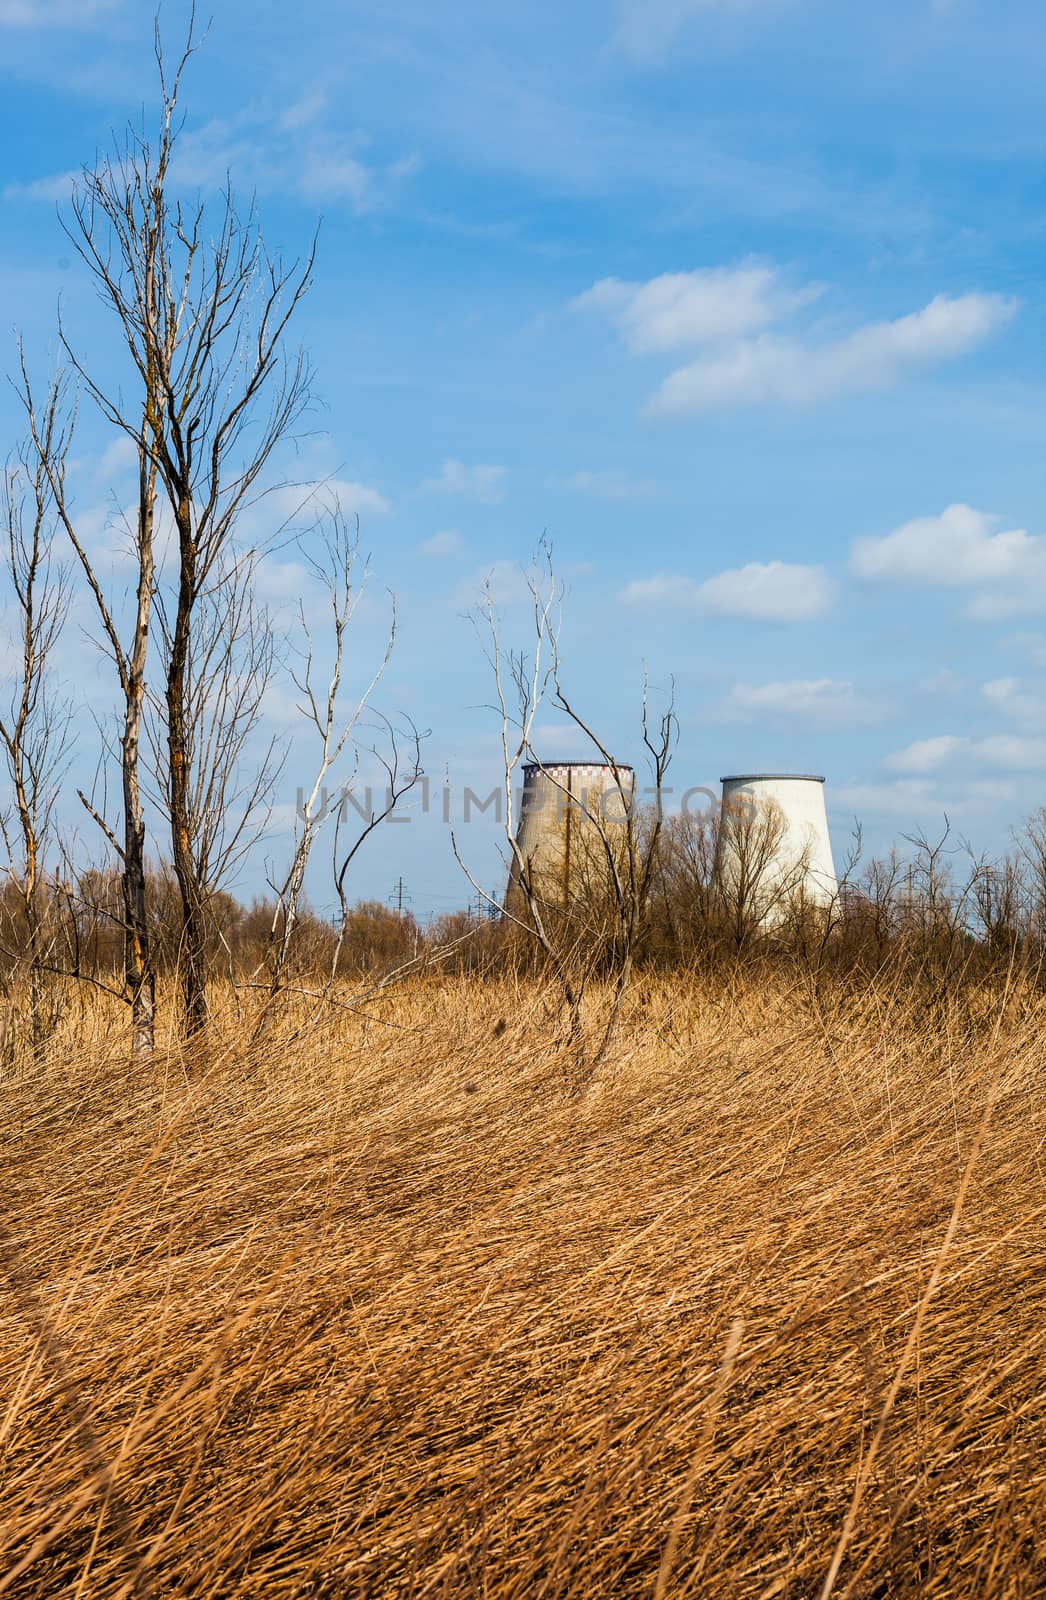 Cooling towers of the cogeneration plant near Kyiv, Ukraine by rootstocks